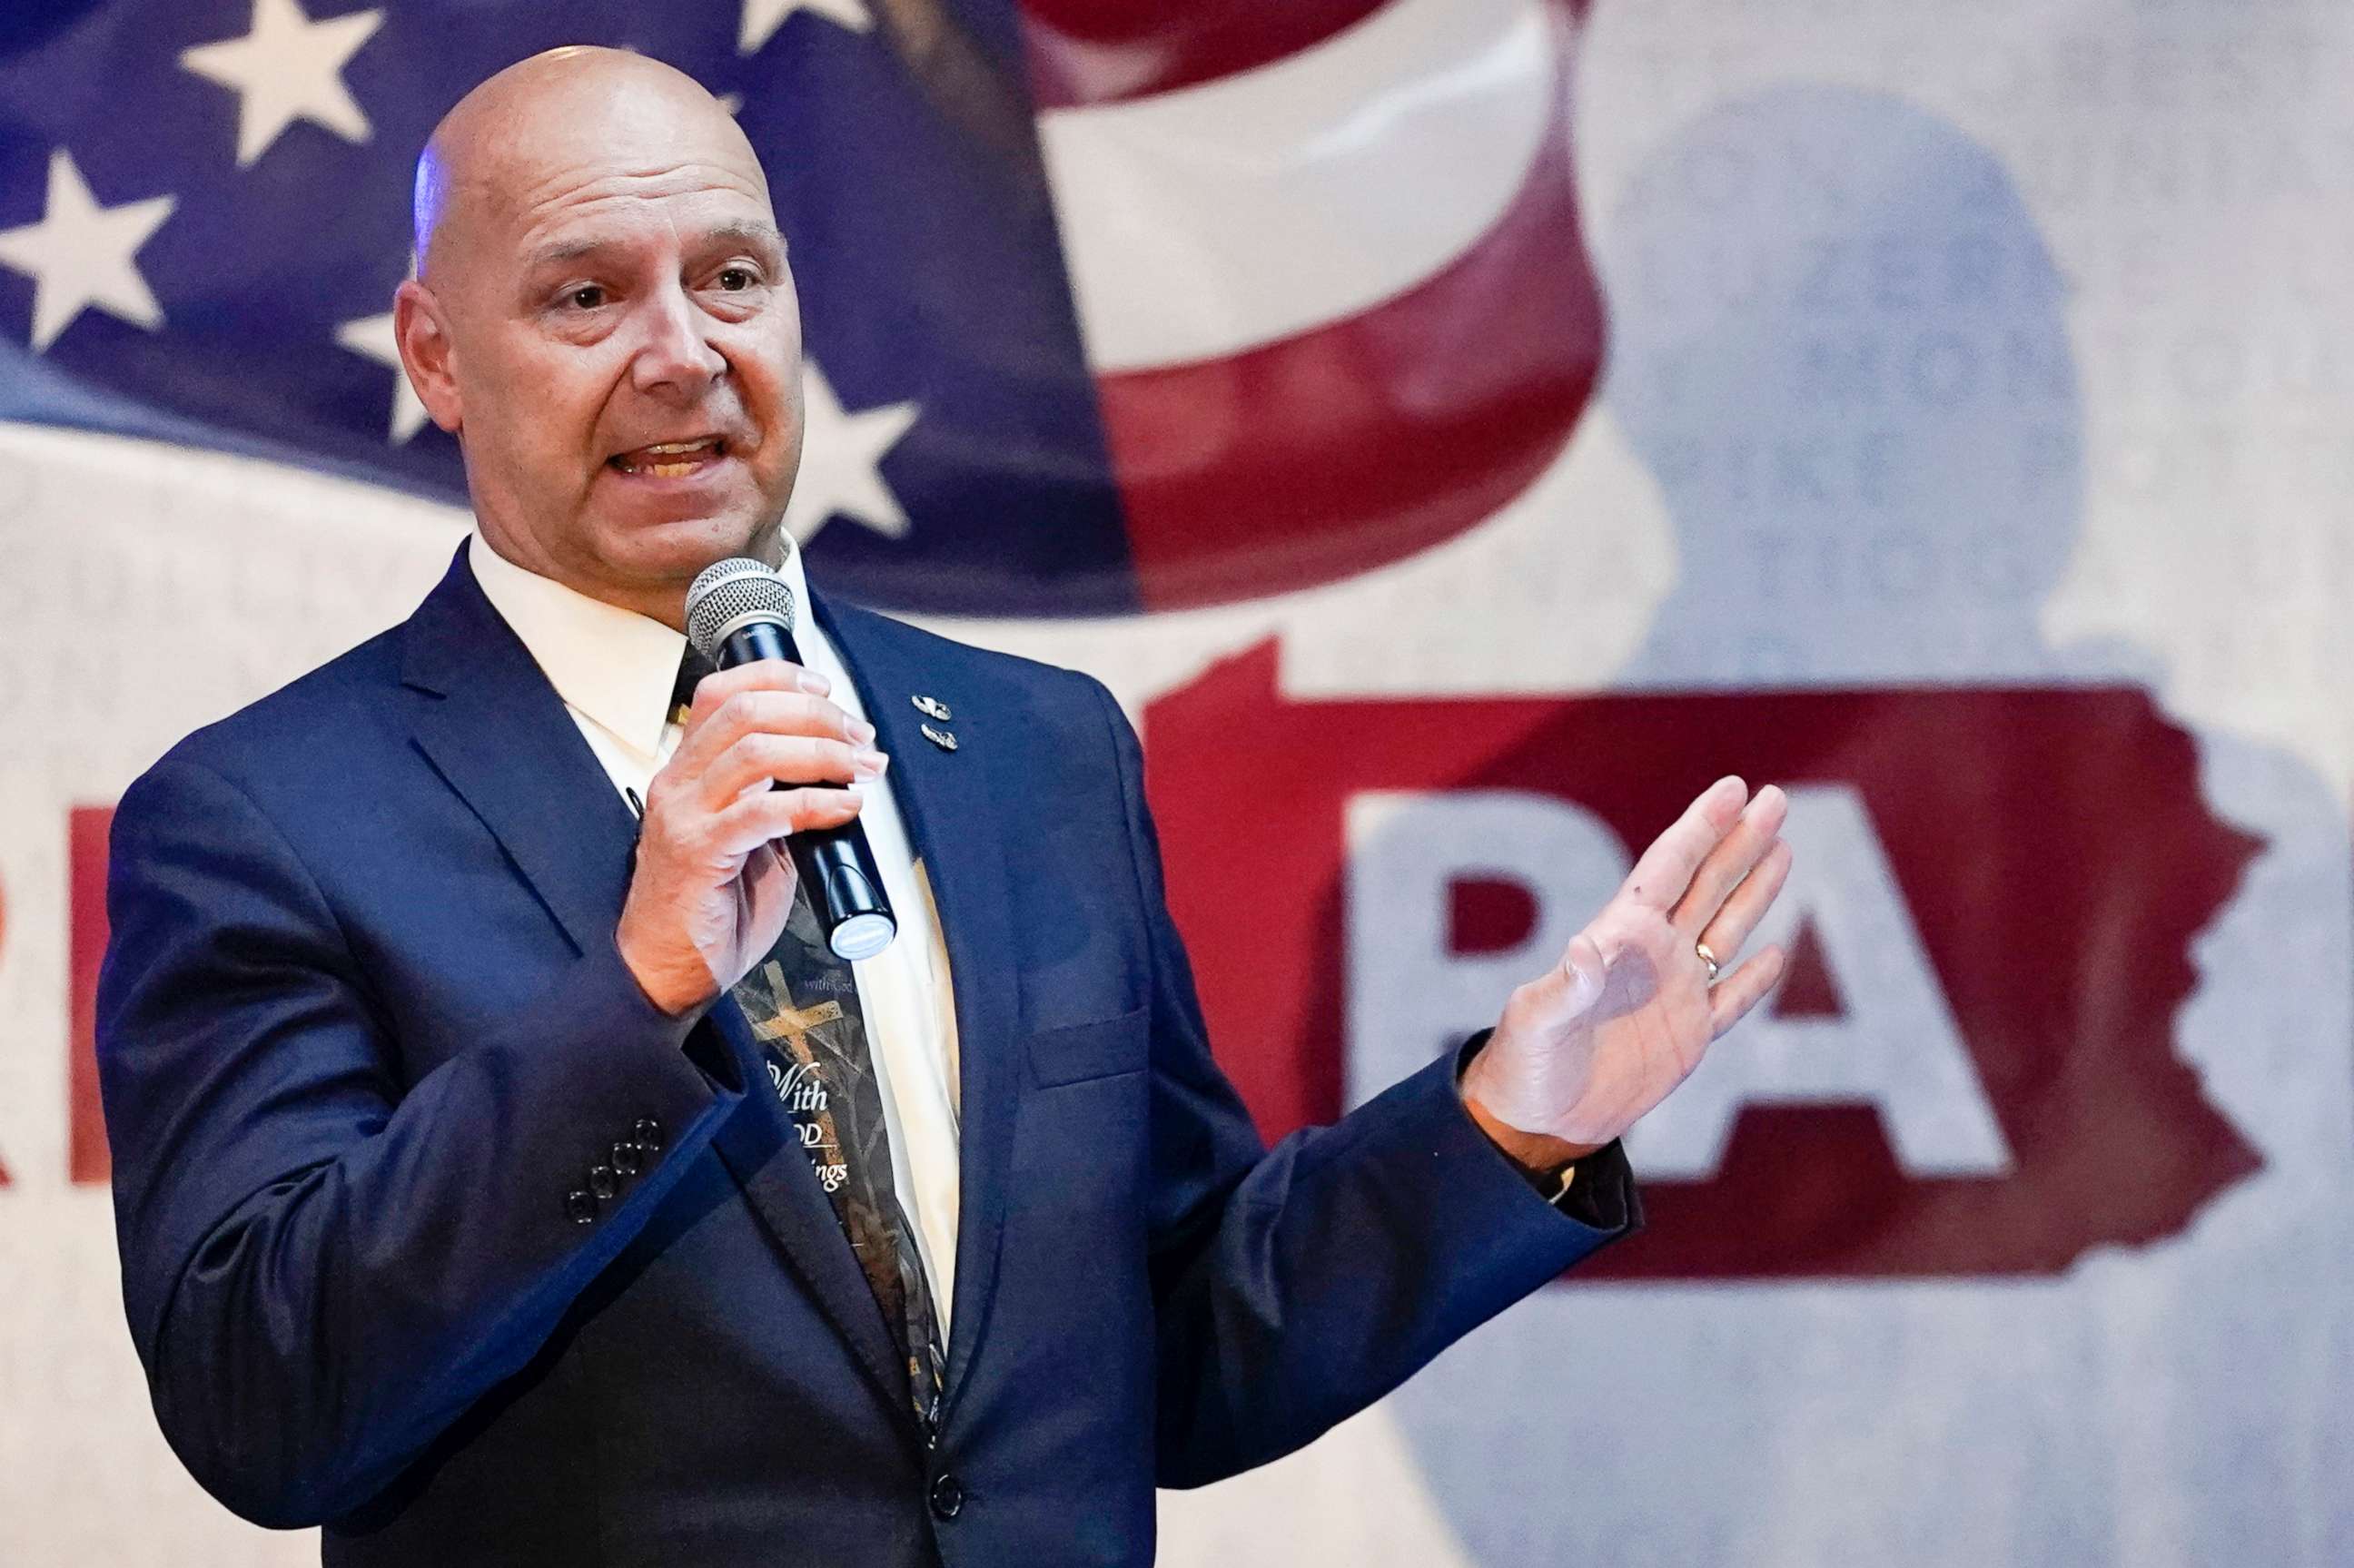 PHOTO: State Sen. Doug Mastriano, R-Franklin, a Republican candidate for Governor of Pennsylvania, speaks at a primary night election gathering in Chambersburg, Pa., May 17, 2022.